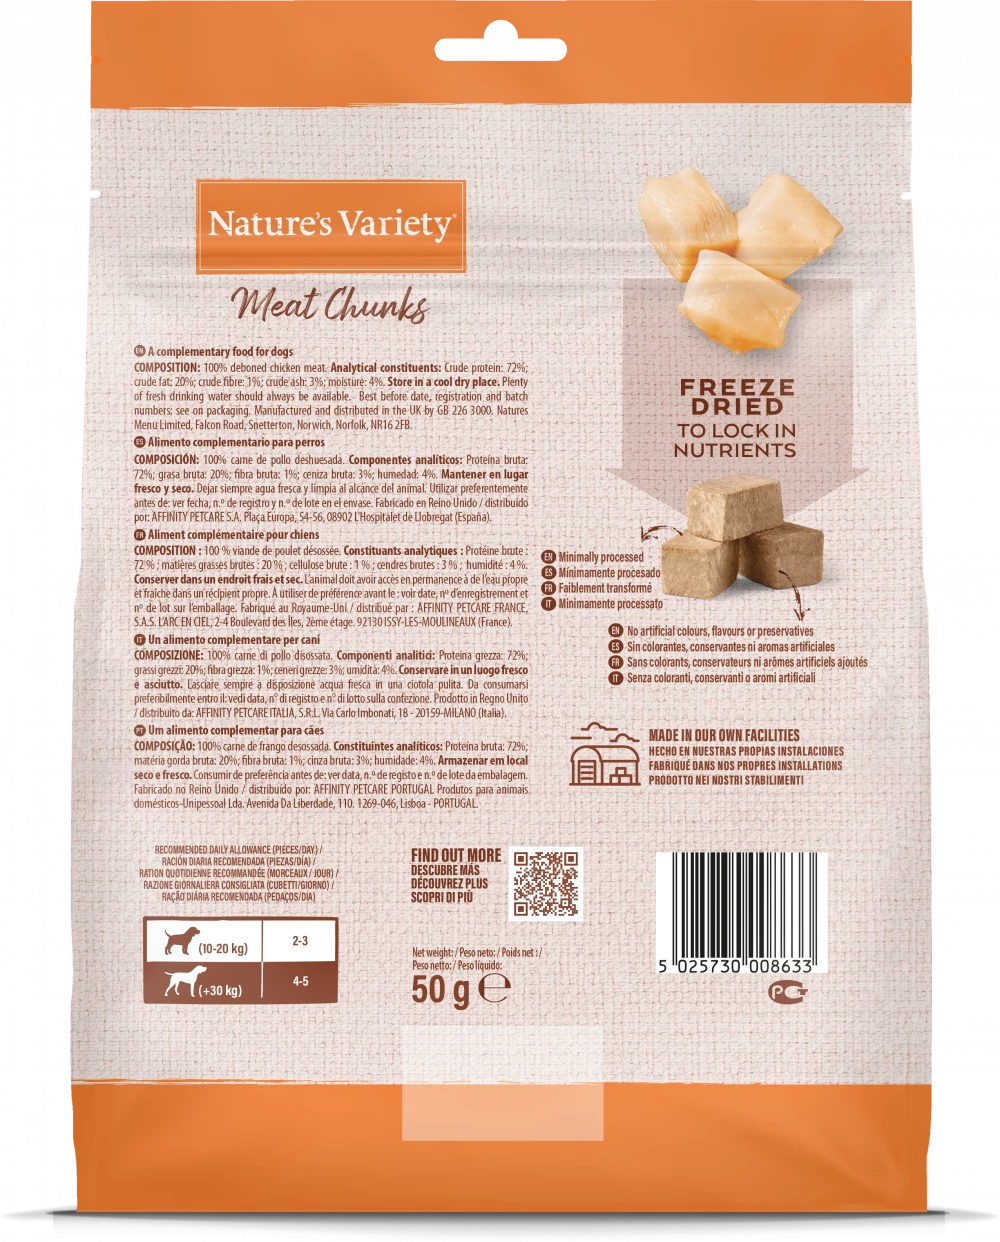 Natures Variety Freeze Dried Meat Chunks 50g Dog Treats Back of Bag Chicken Ingredients List